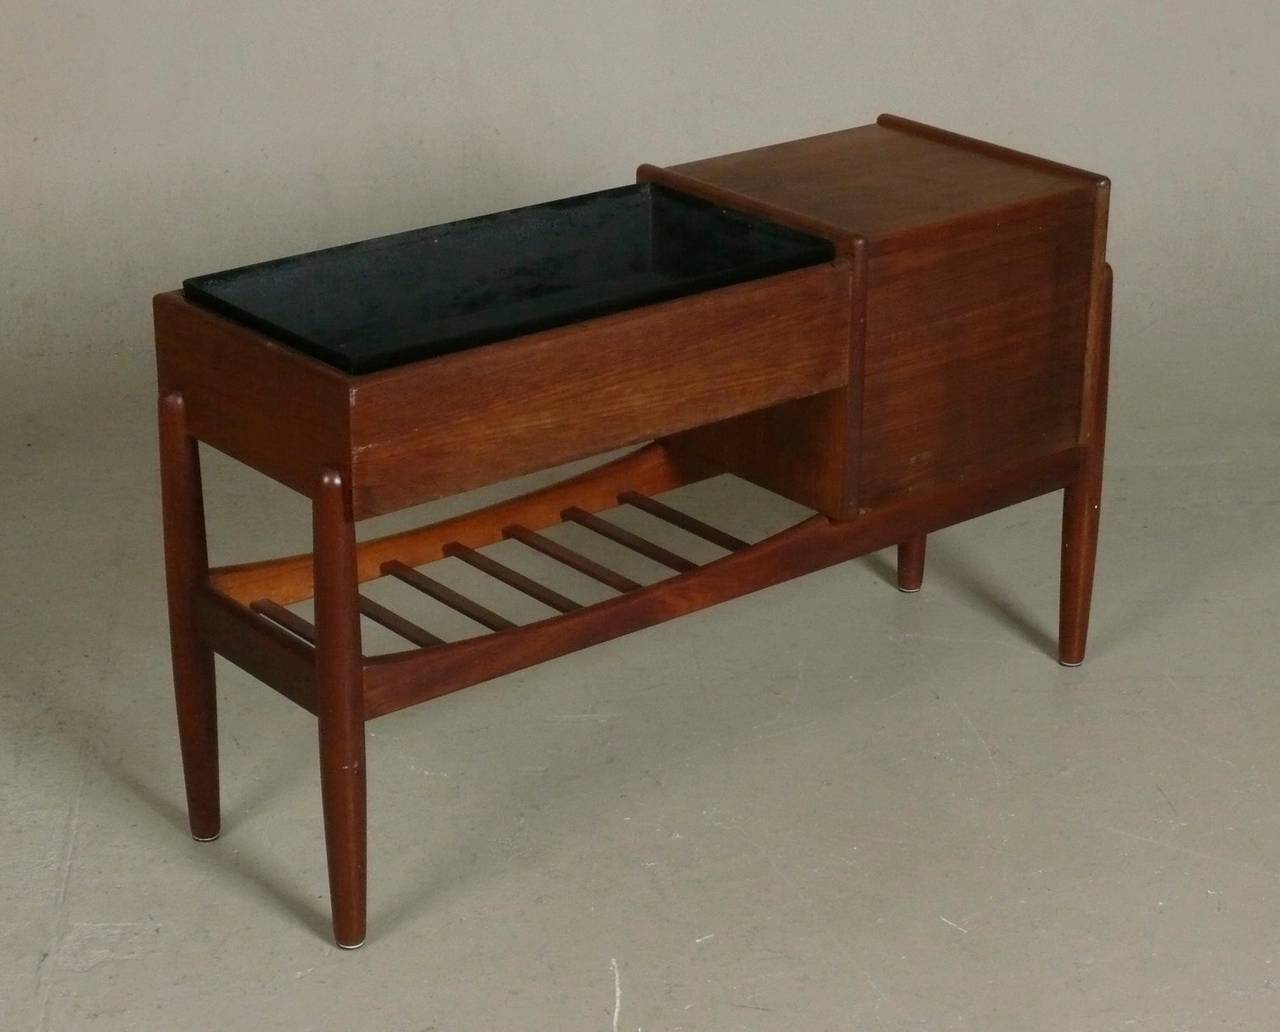 Early 1960s console table in teak with three small drawers, a planter box and lower magazine shelf designed by Arne Wahl Iversen for Vinde Mobelfabrik, Denmark.